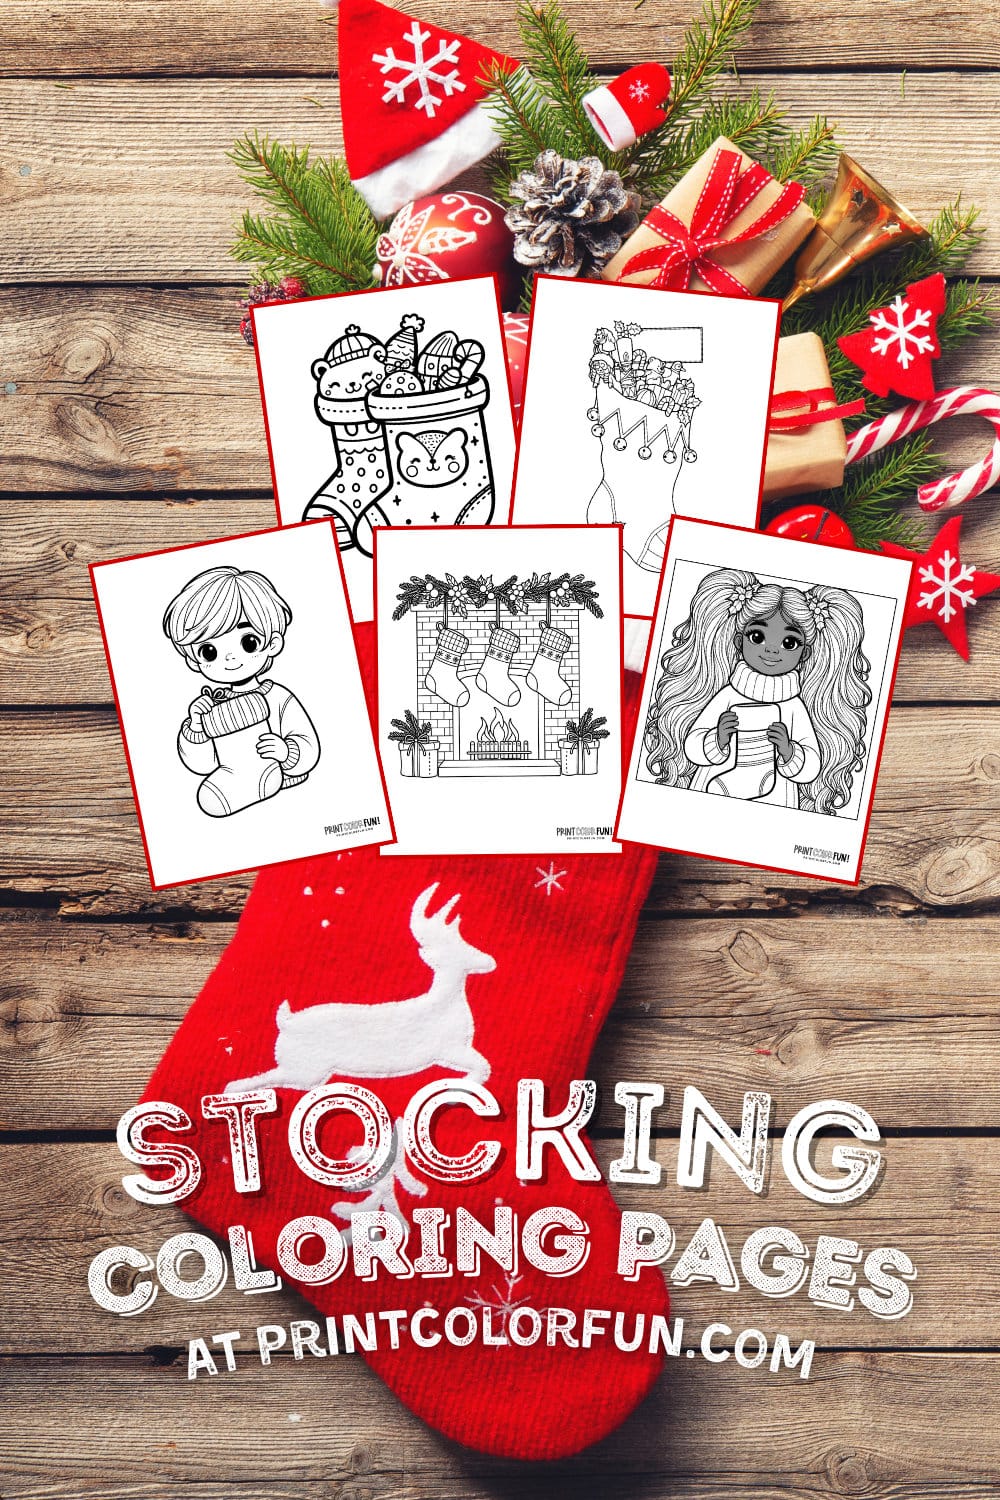 Christmas stockings holiday coloring pages and clipart - PrintColorFun com